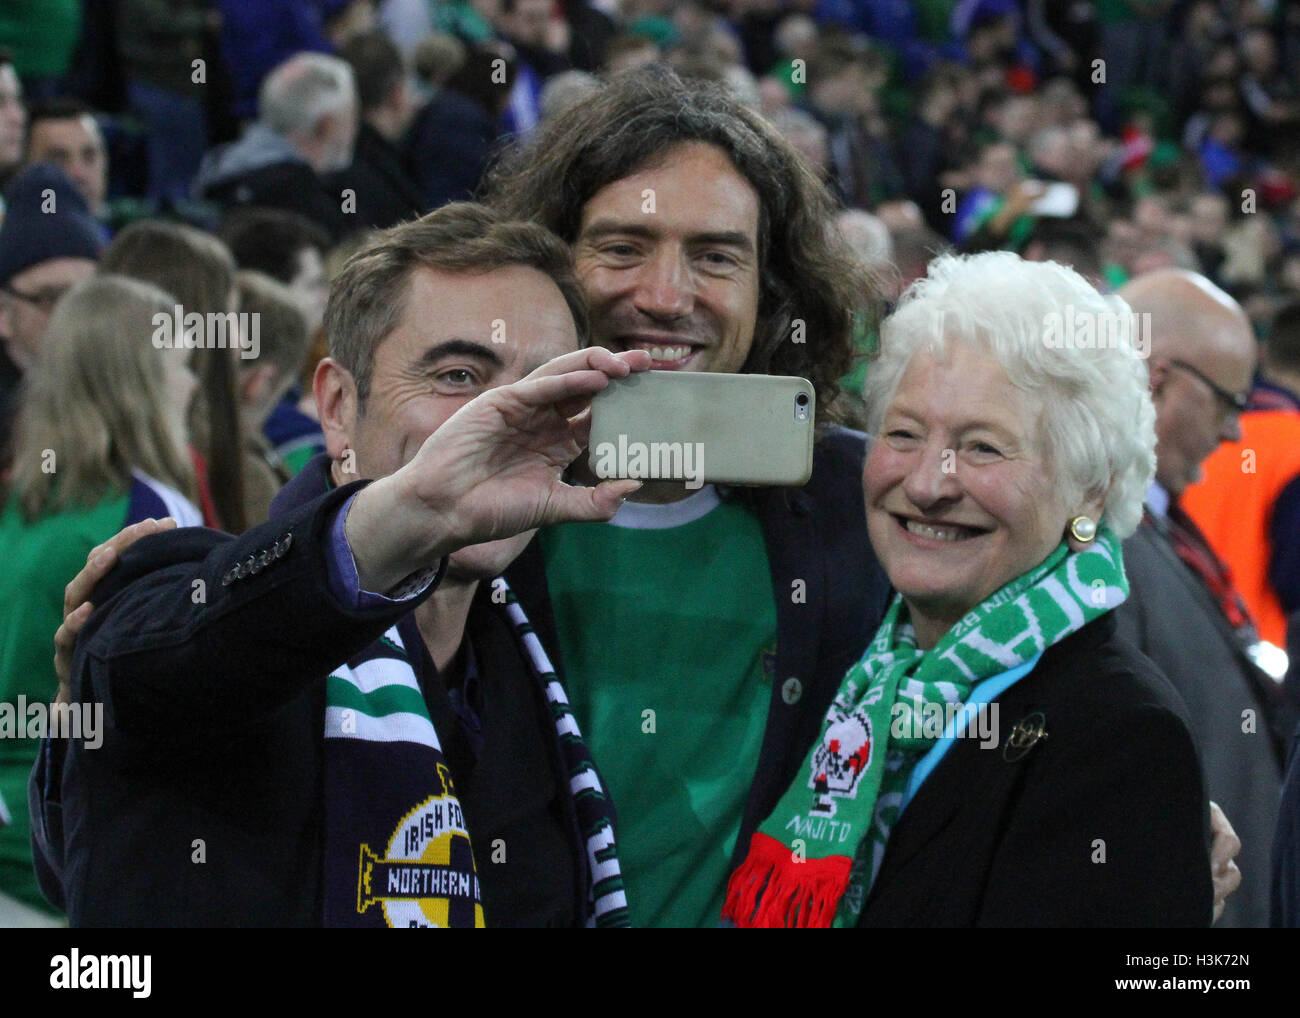 National Football Stadium at Windsor Park, Belfast, Northern Ireland.  08th October 2016. To mark the official opening of the National Football Stadium at Windsor Park in Belfast (the re-development of the old Windsor Park) a Lap of Northern Ireland Legends around the stadium took place. Selfie-time for (l-r) Actor Jimmy Nesbitt, Snow Patrol's Gary Lightbody and Dame Mary Peters at the event. David Hunter/Alamy Live News. Stock Photo